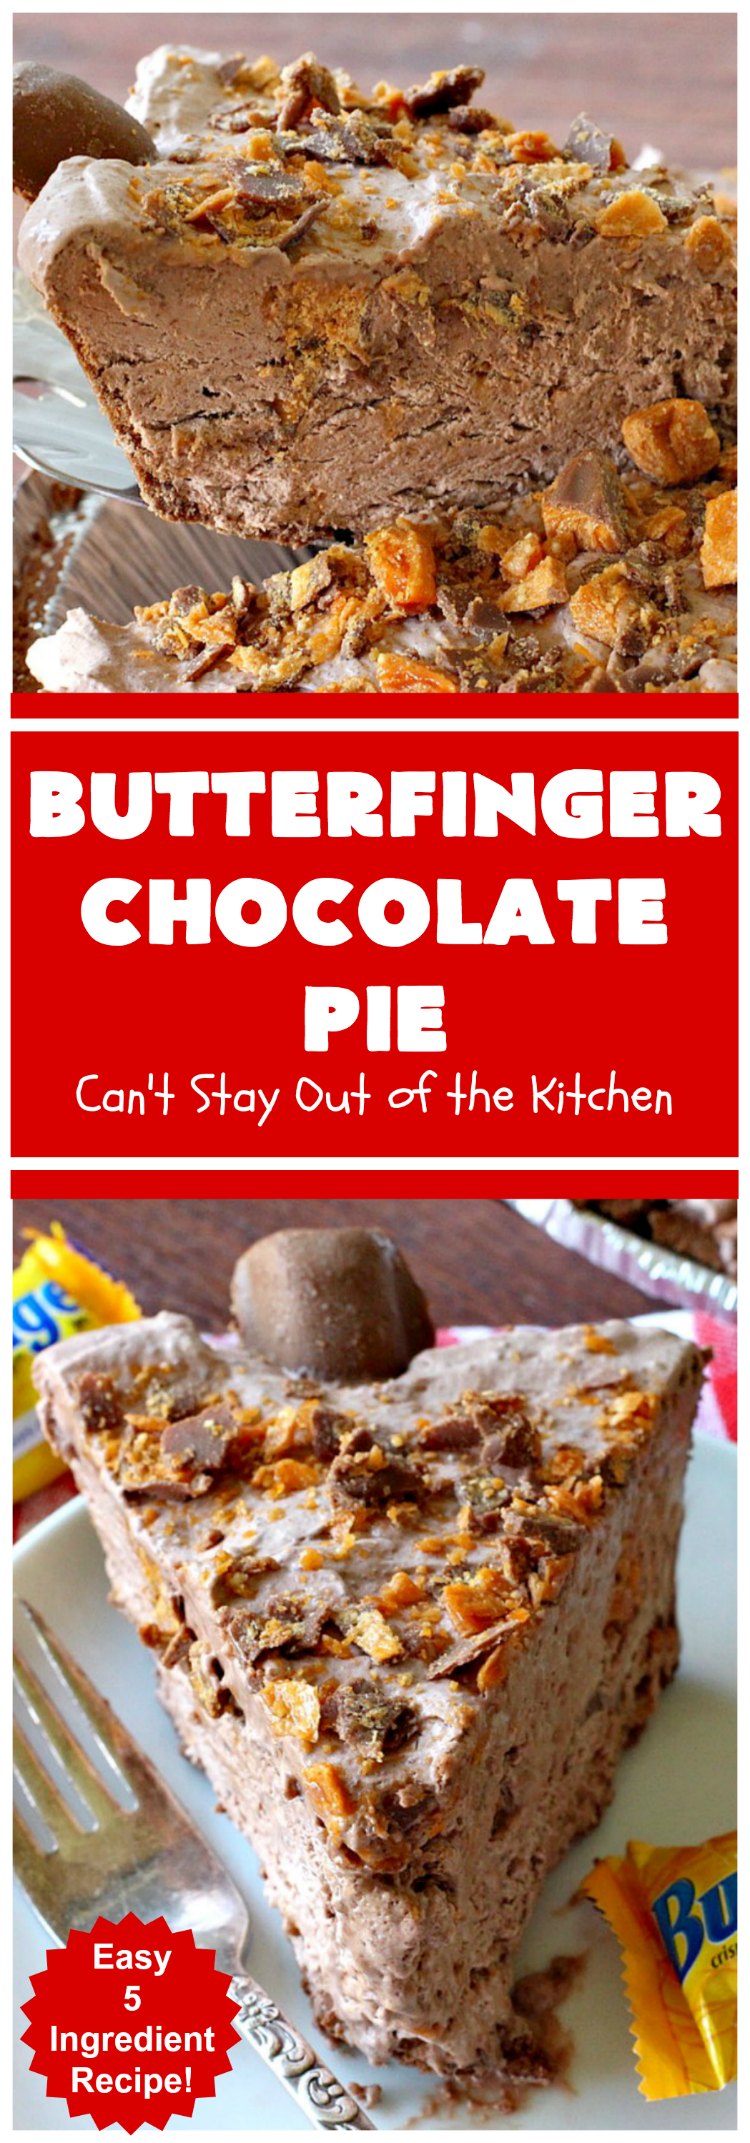 Butterfinger Chocolate Pie | Can't Stay Out of the Kitchen